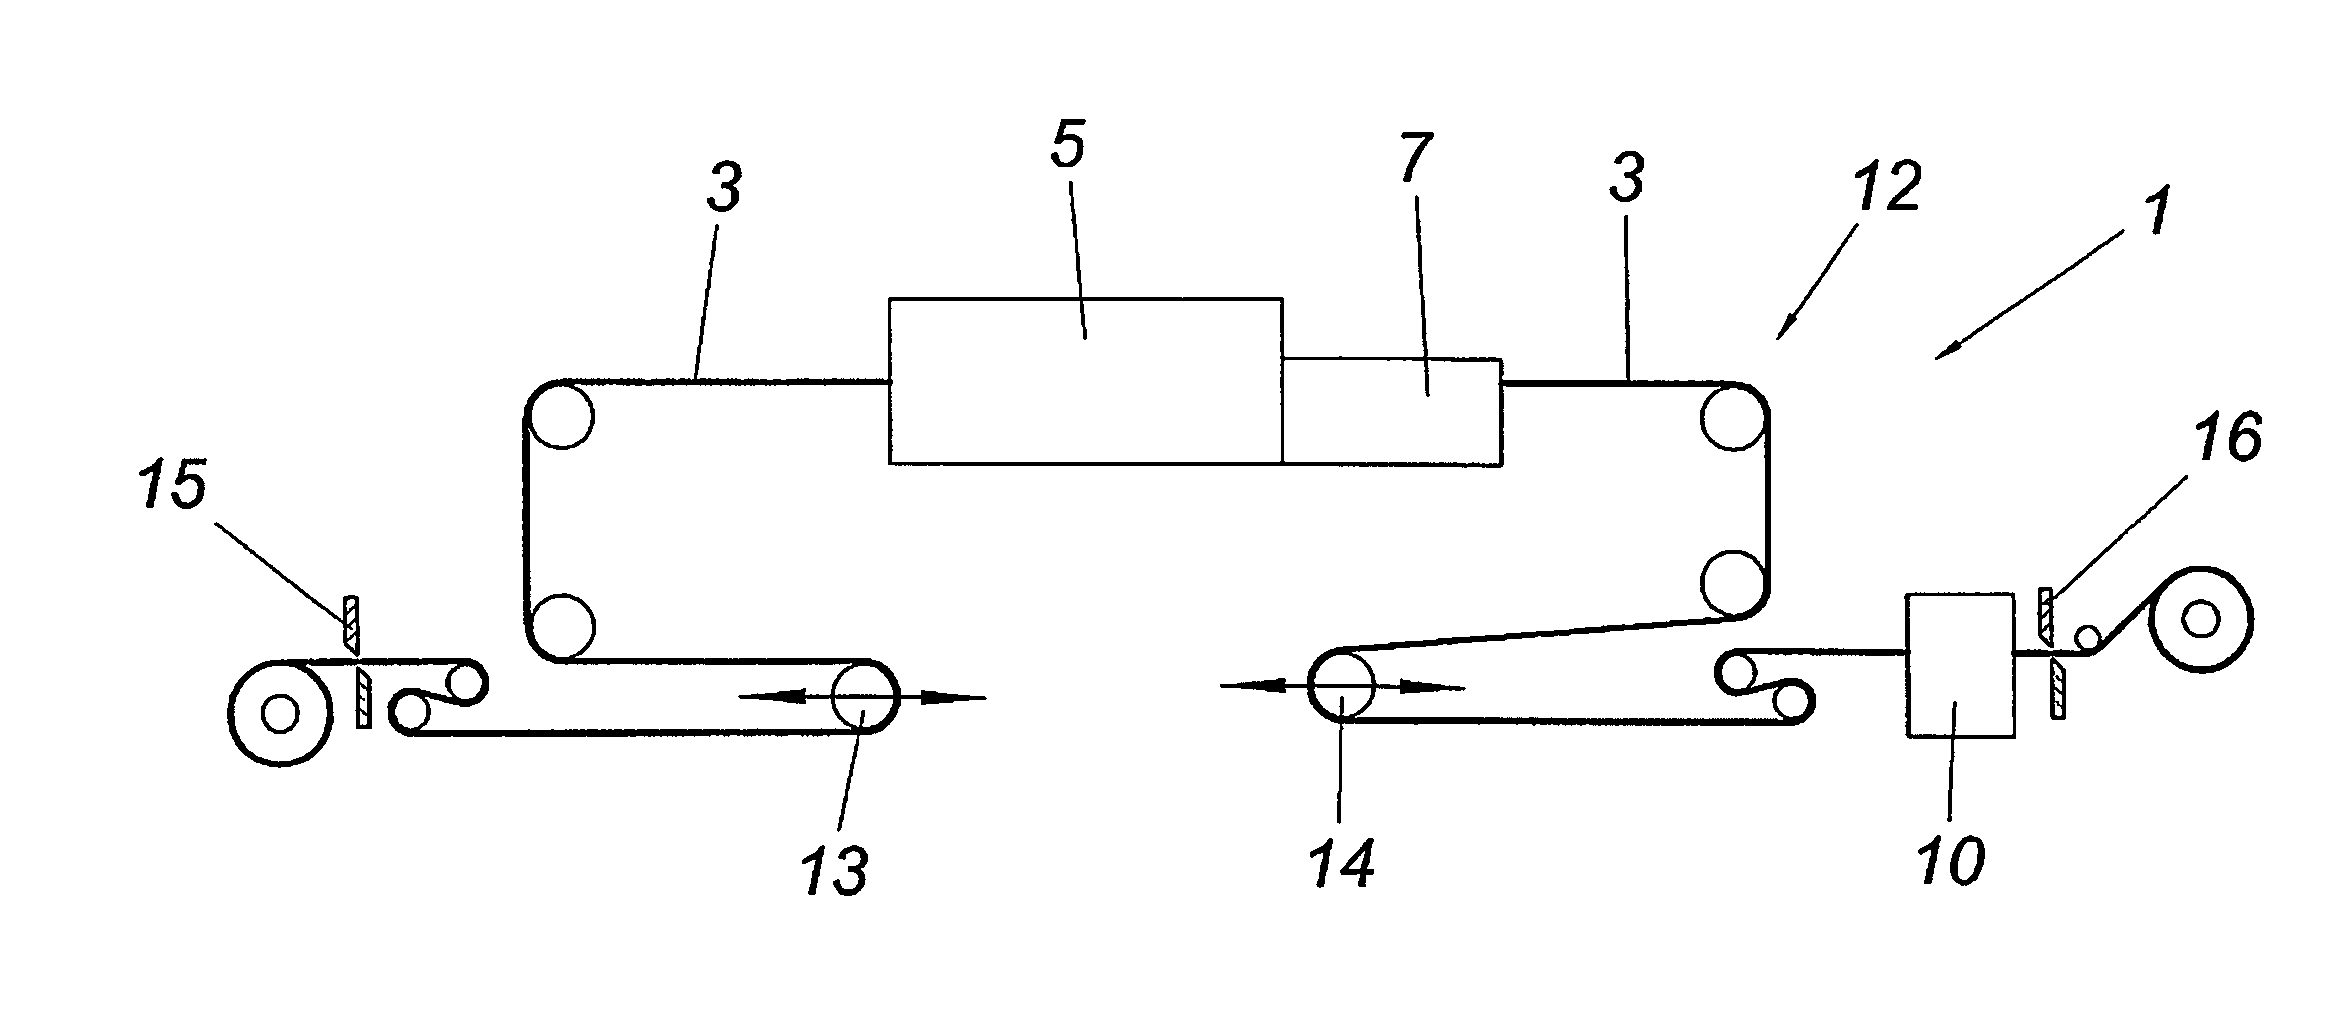 Method for heat treating a rolling stock made of a heat-treatable aluminum alloy